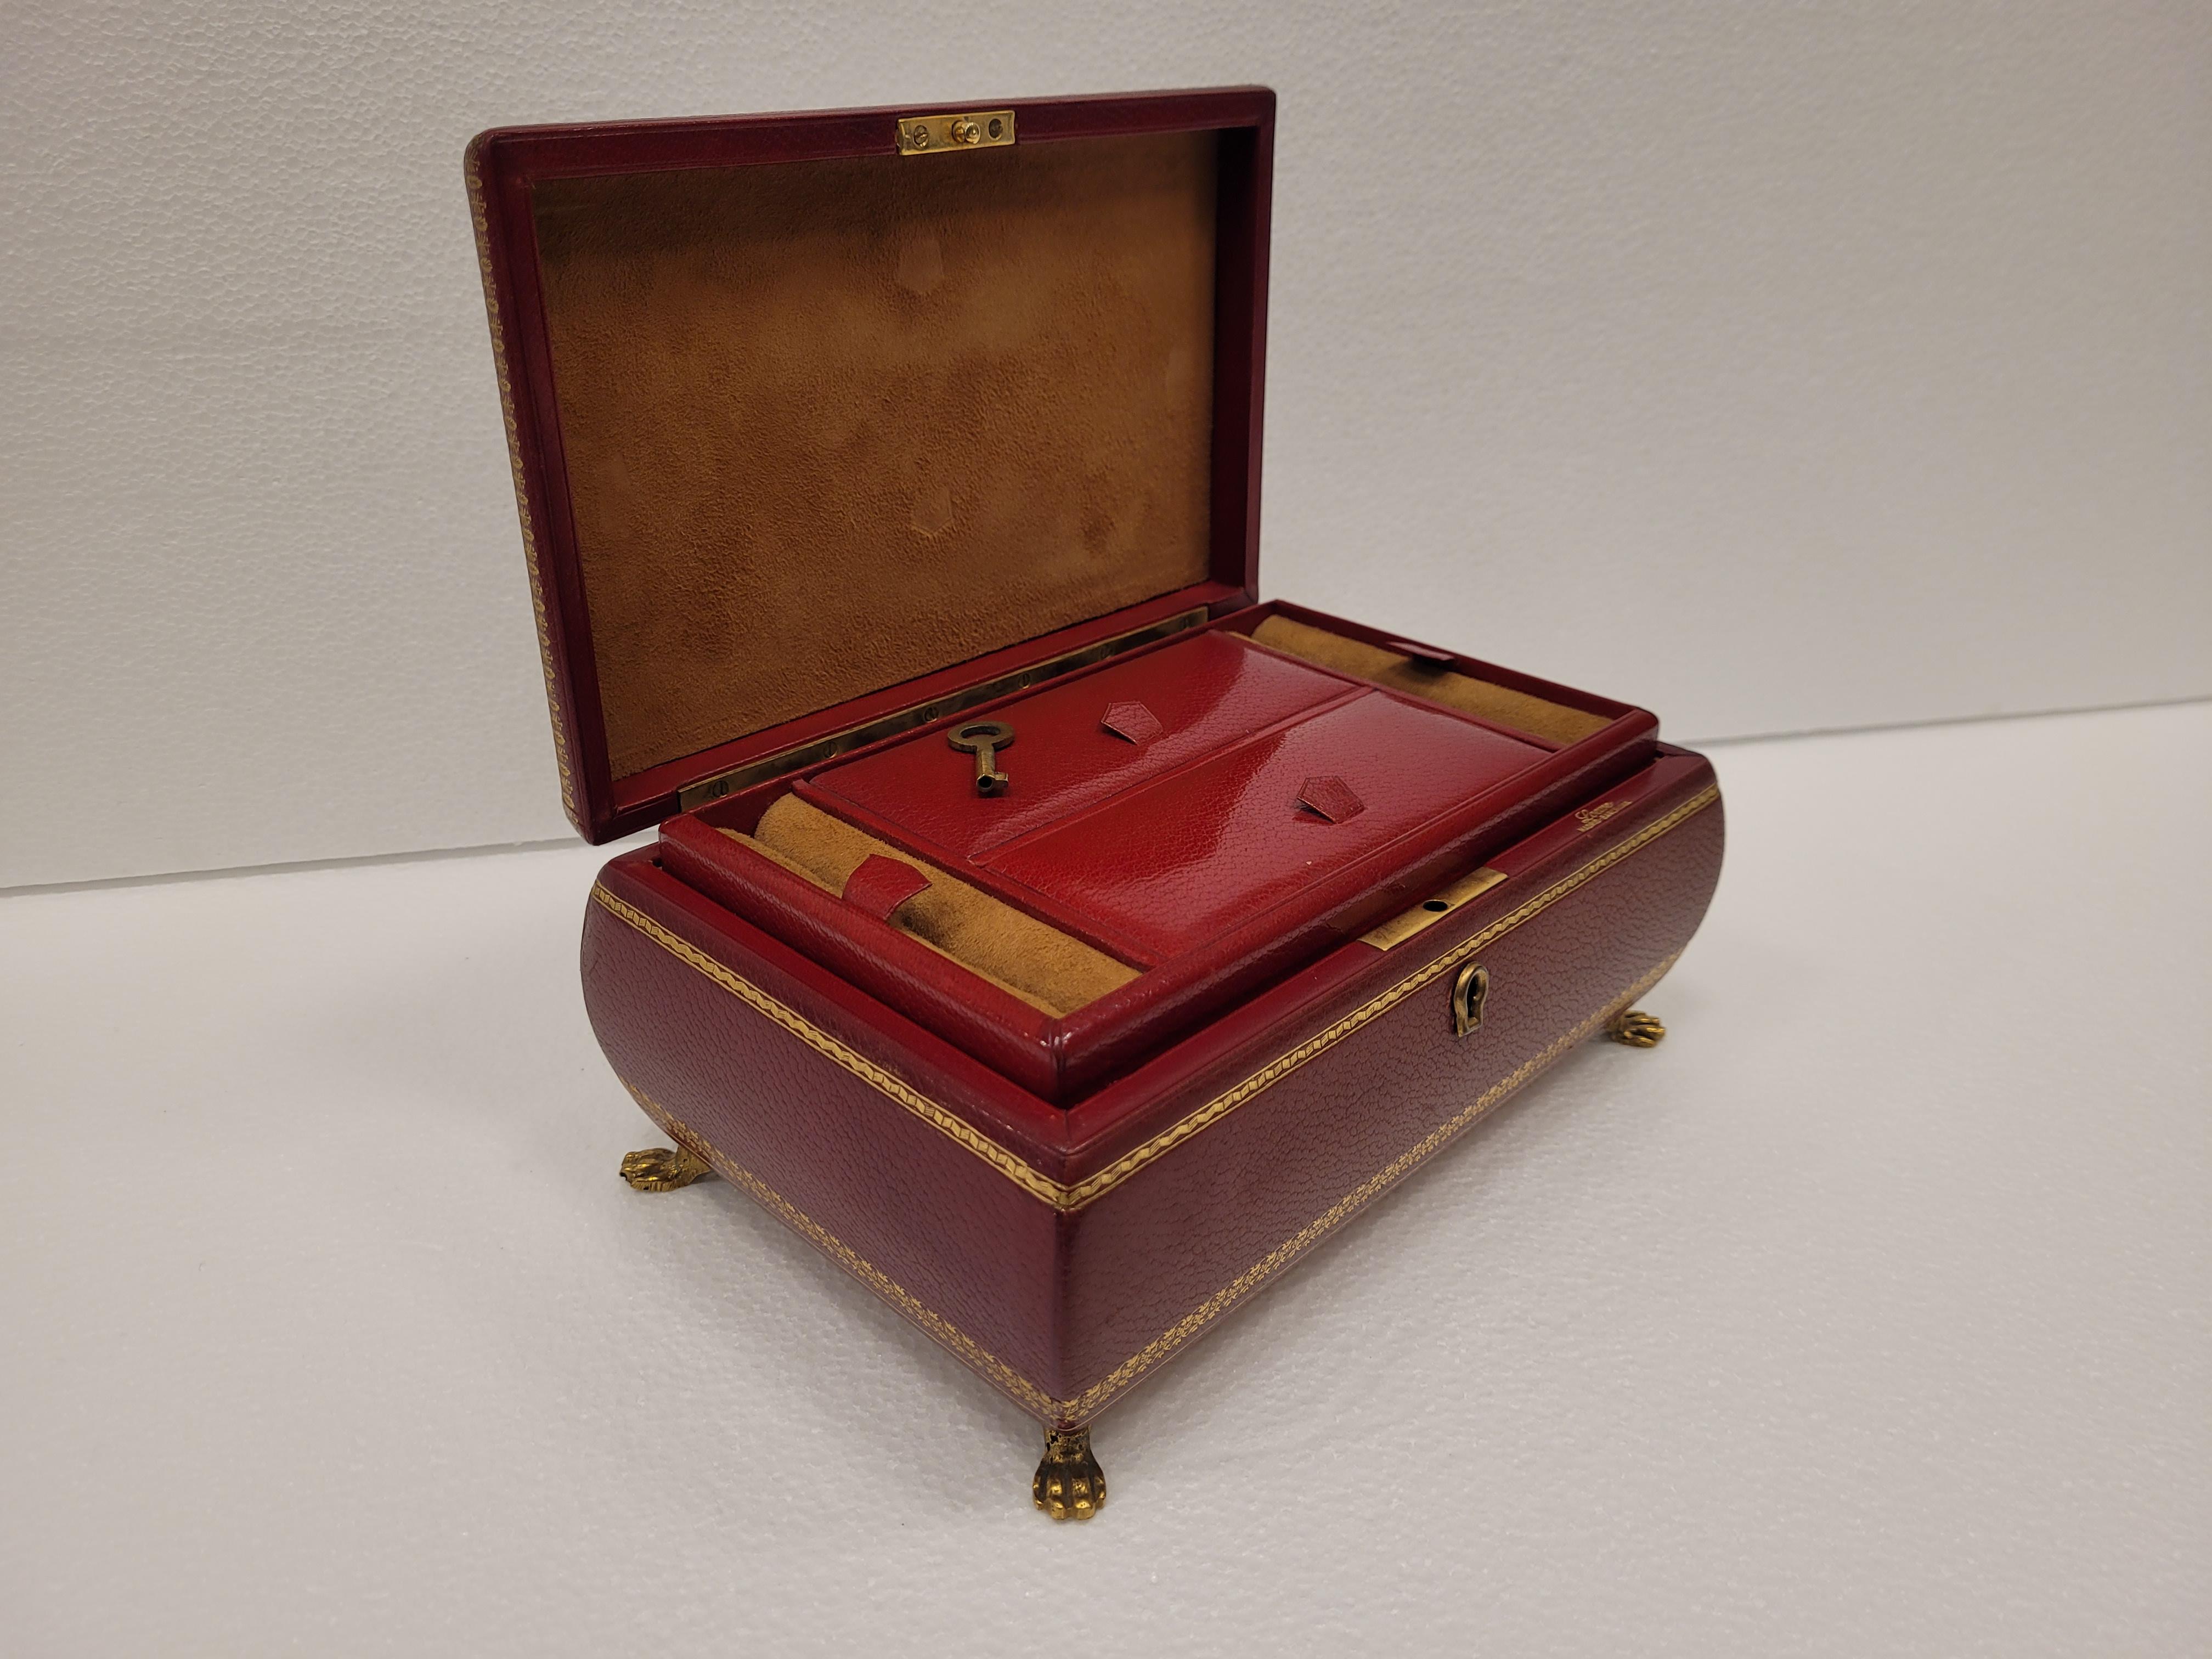 Gorgeous Vintage LOEWE Leather Jewelry Box
Vintage LOEWE Leather Jewelry Box, Garnet Jewelry Box, Jewelry Box with key, removable tray, high quality gold plated hinges, The box stands on 4 brass lion legs.
Removable interior with several independent